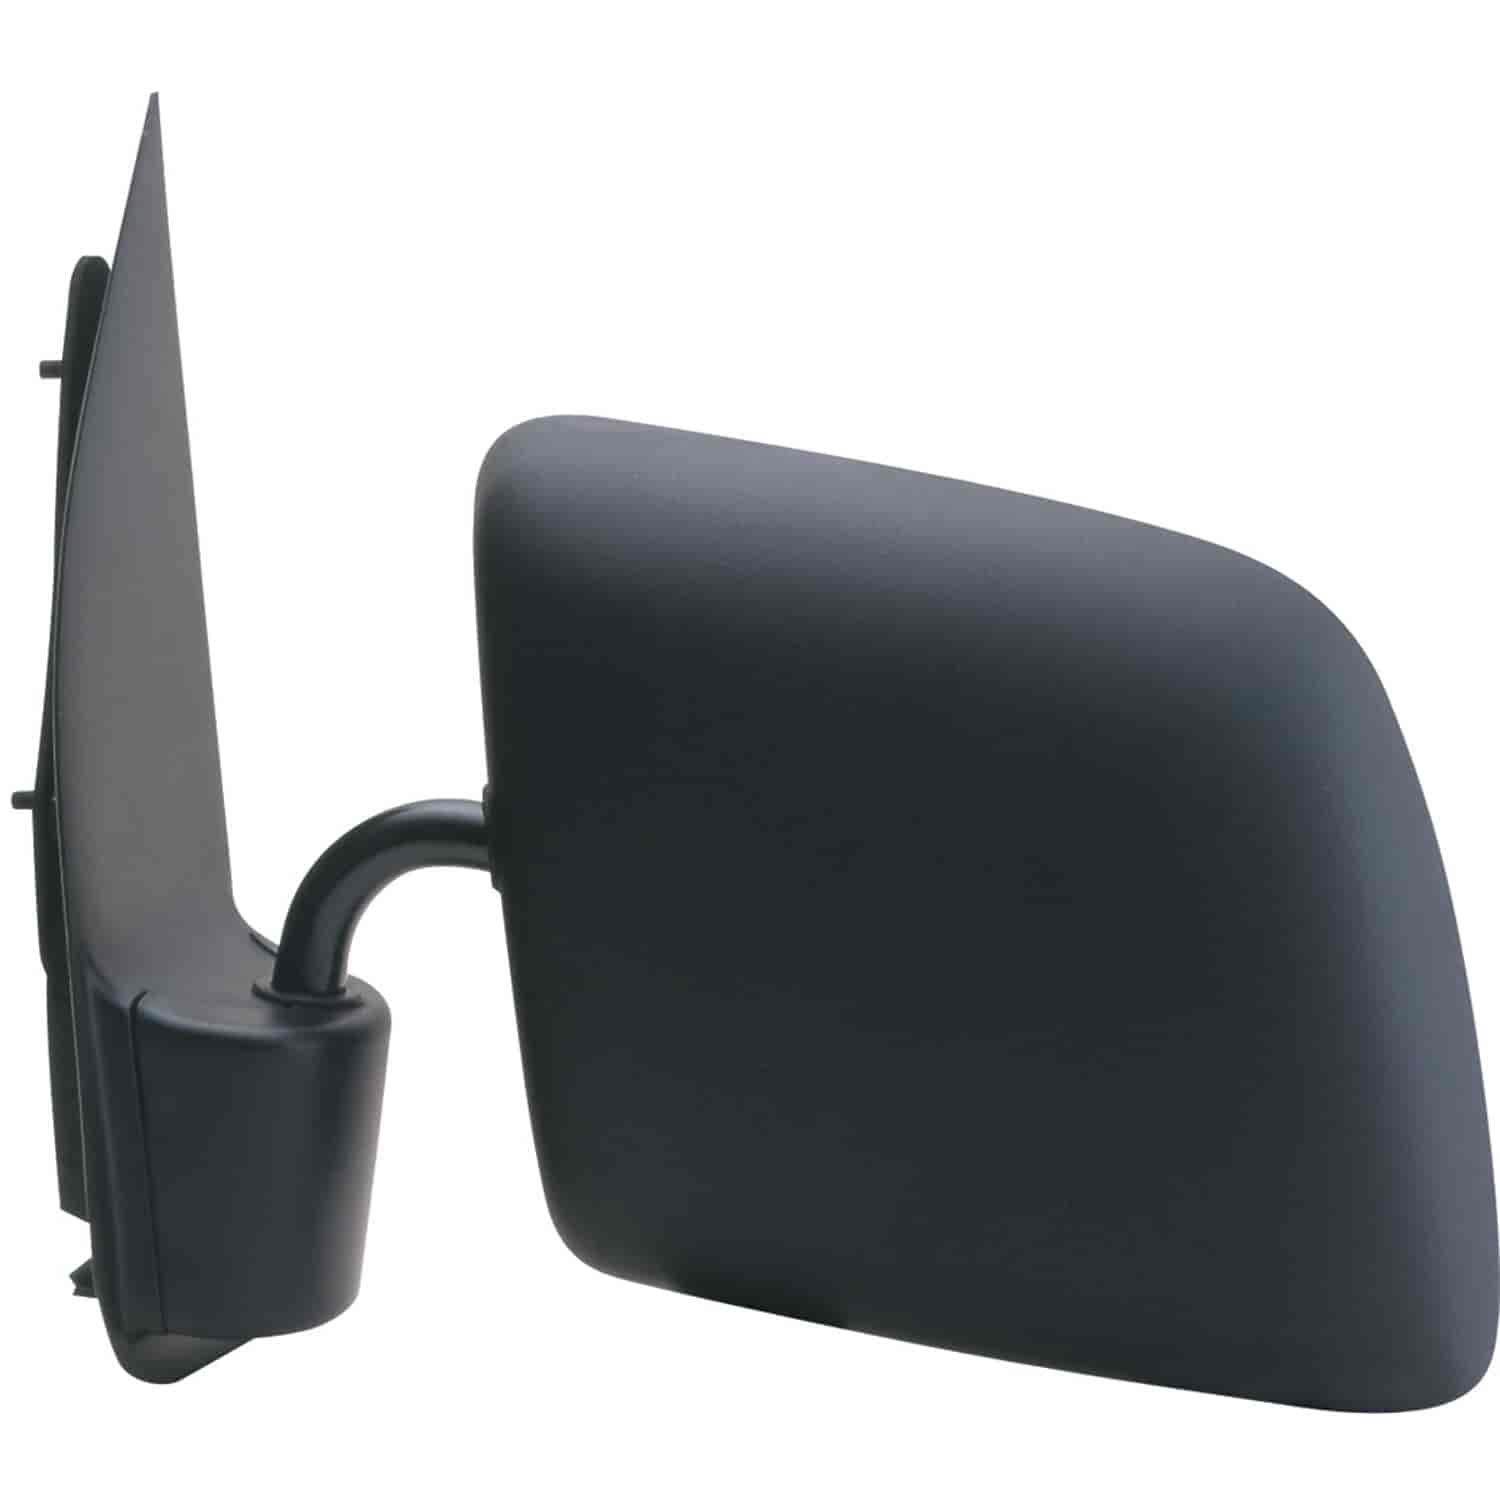 OEM Style Replacement mirror for 92-06 Ford Econoline Van driver side mirror tested to fit and funct